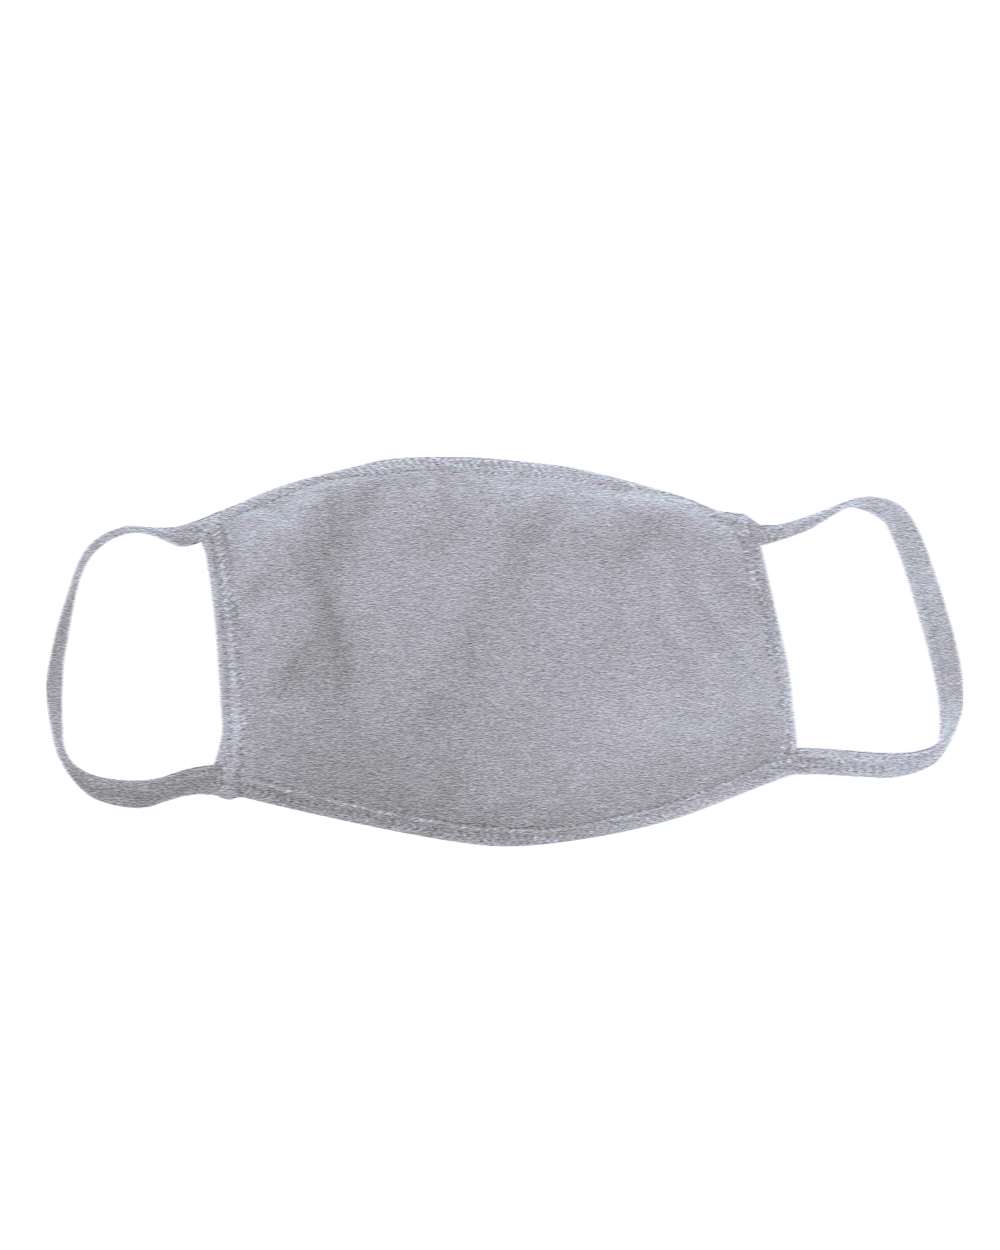 Bayside 9100 - 100% Cotton Face Mask 25/PACK